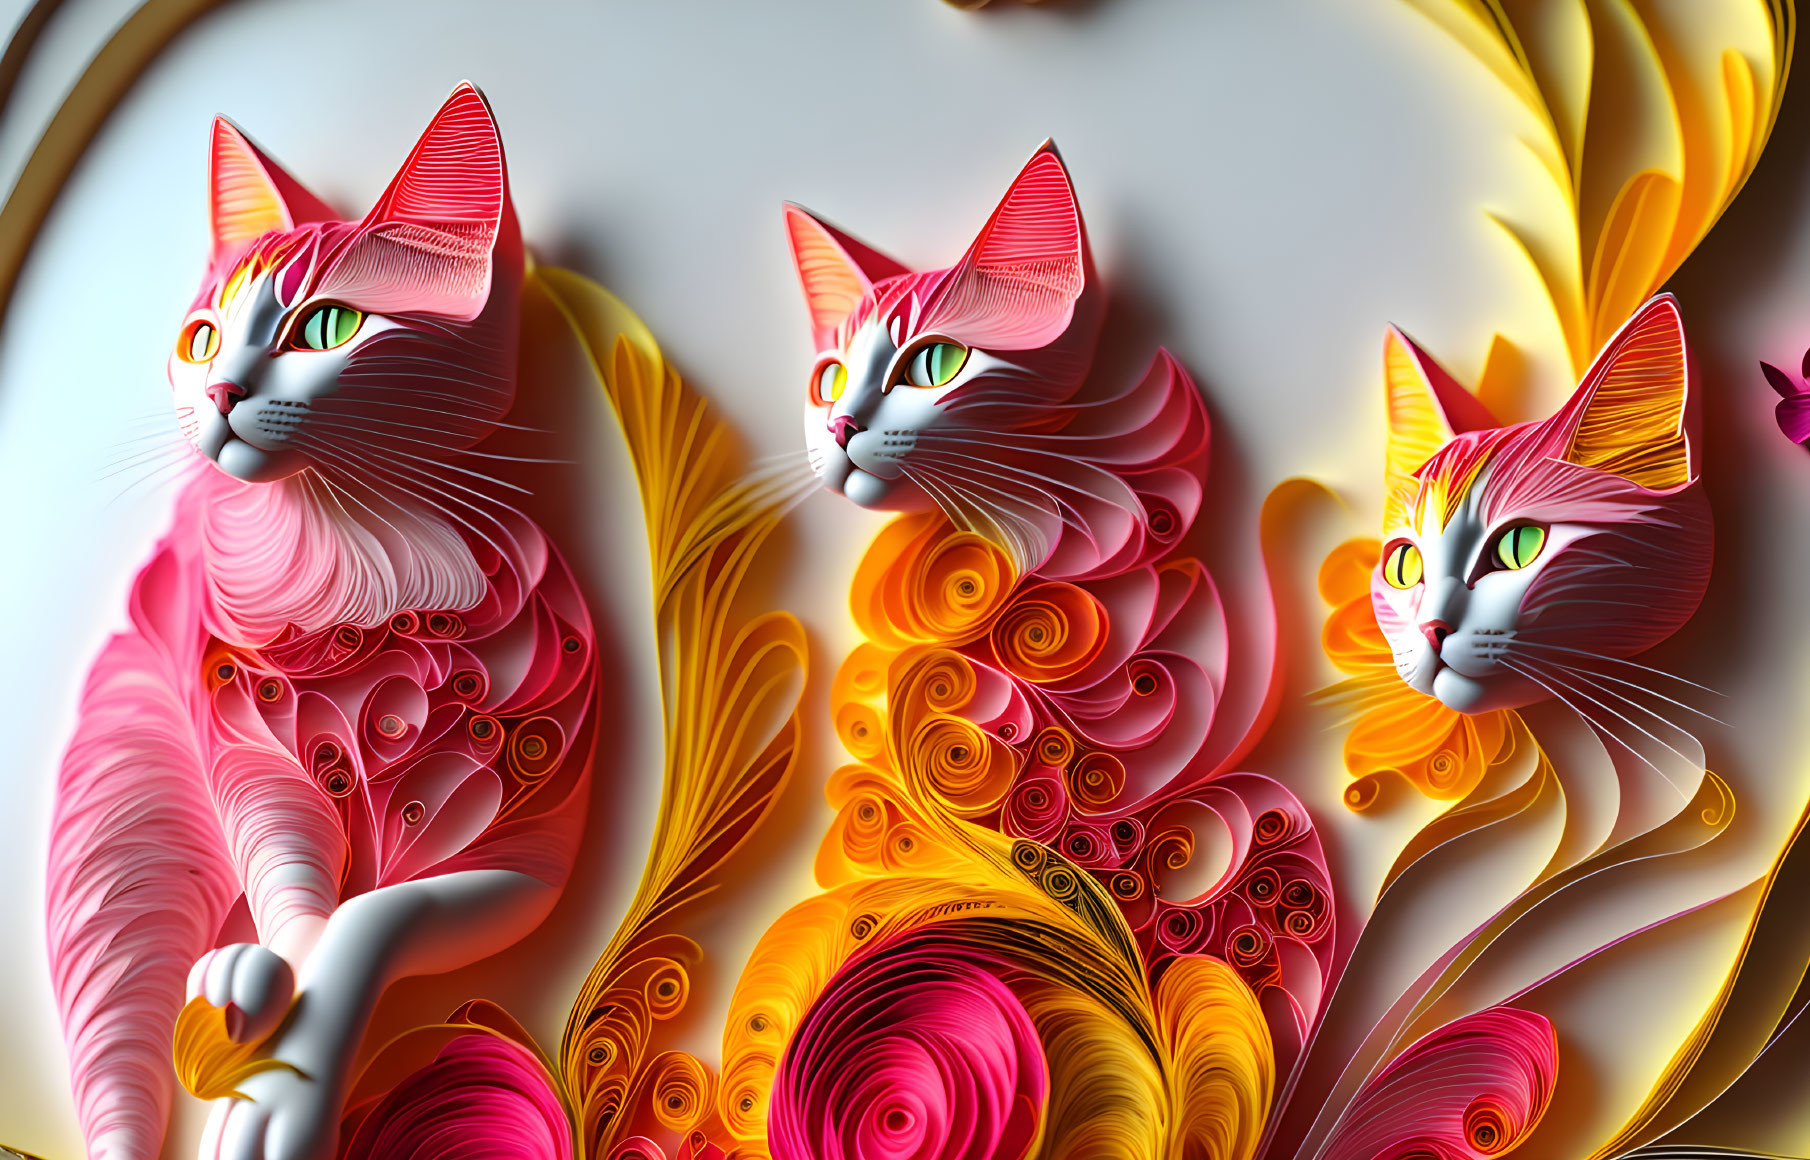 Stylized paper art cats with pink and orange patterns on white background